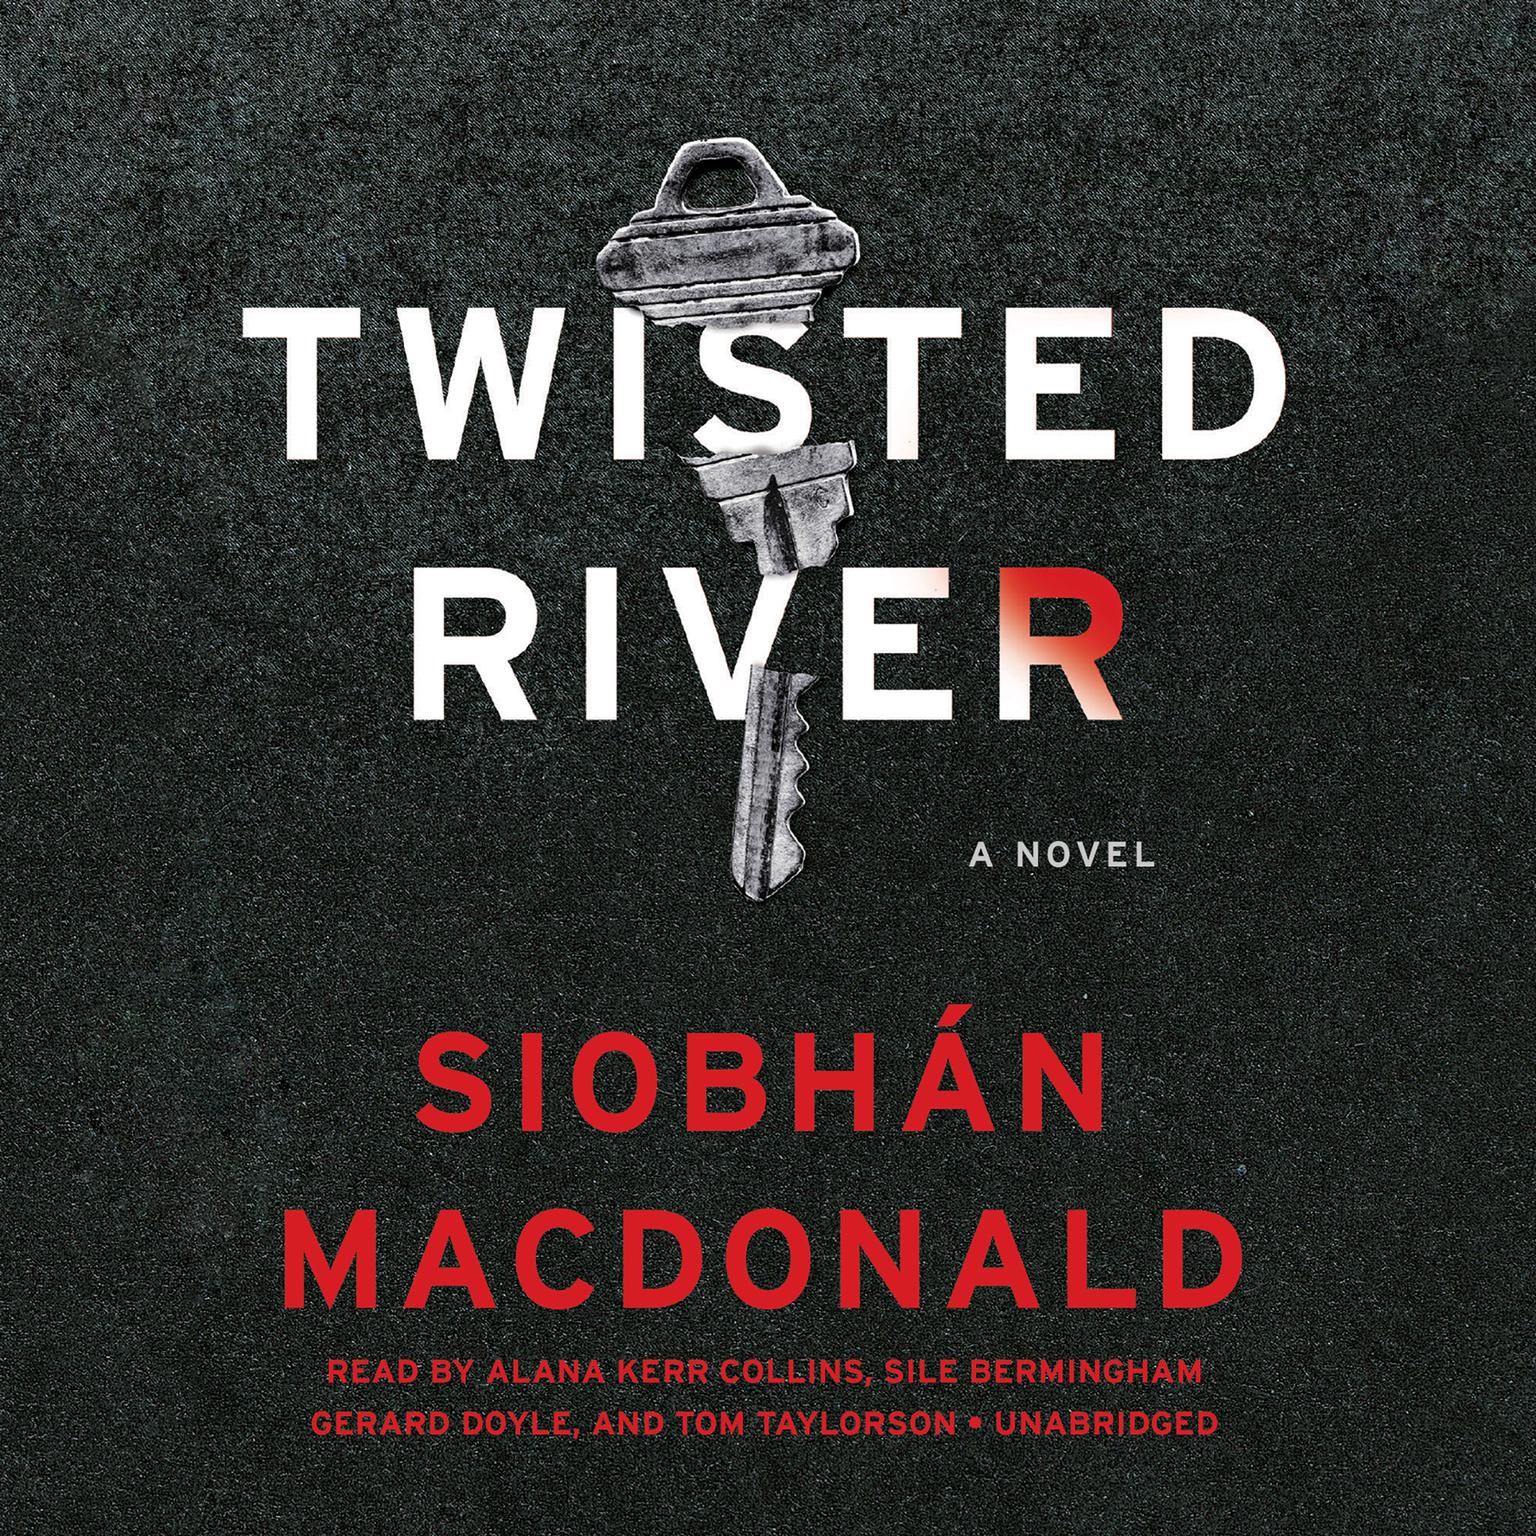 Twisted River Audiobook, by Siobhán MacDonald